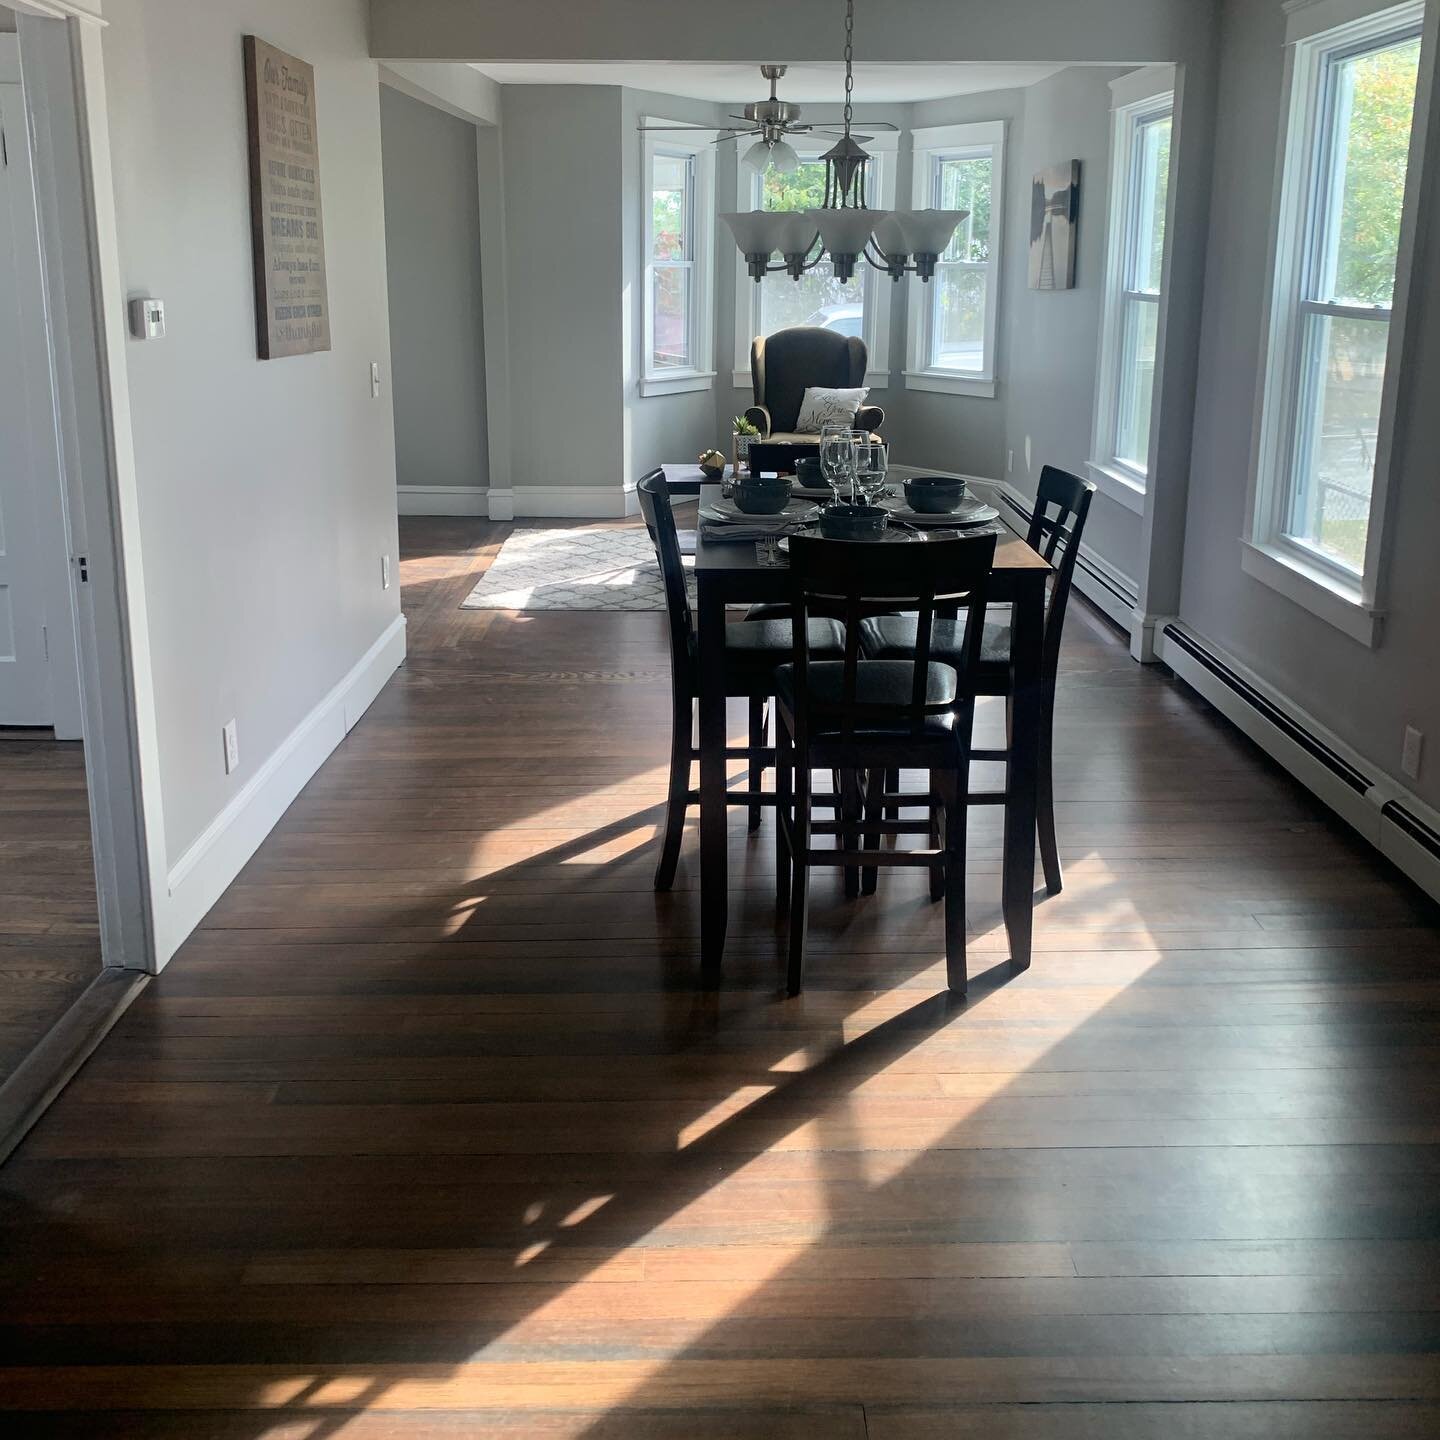 Another beautiful project done ✅!!! Thank you Joe for the opportunity to work for Blue Island Construction Services. www.gqhardwoodfloors.com #GQ #OneBoardAtaTime #gqhardwoodfloorsinc #floors #flooring #hardwood #woodfloor #tiverton #tivertonri #rhod